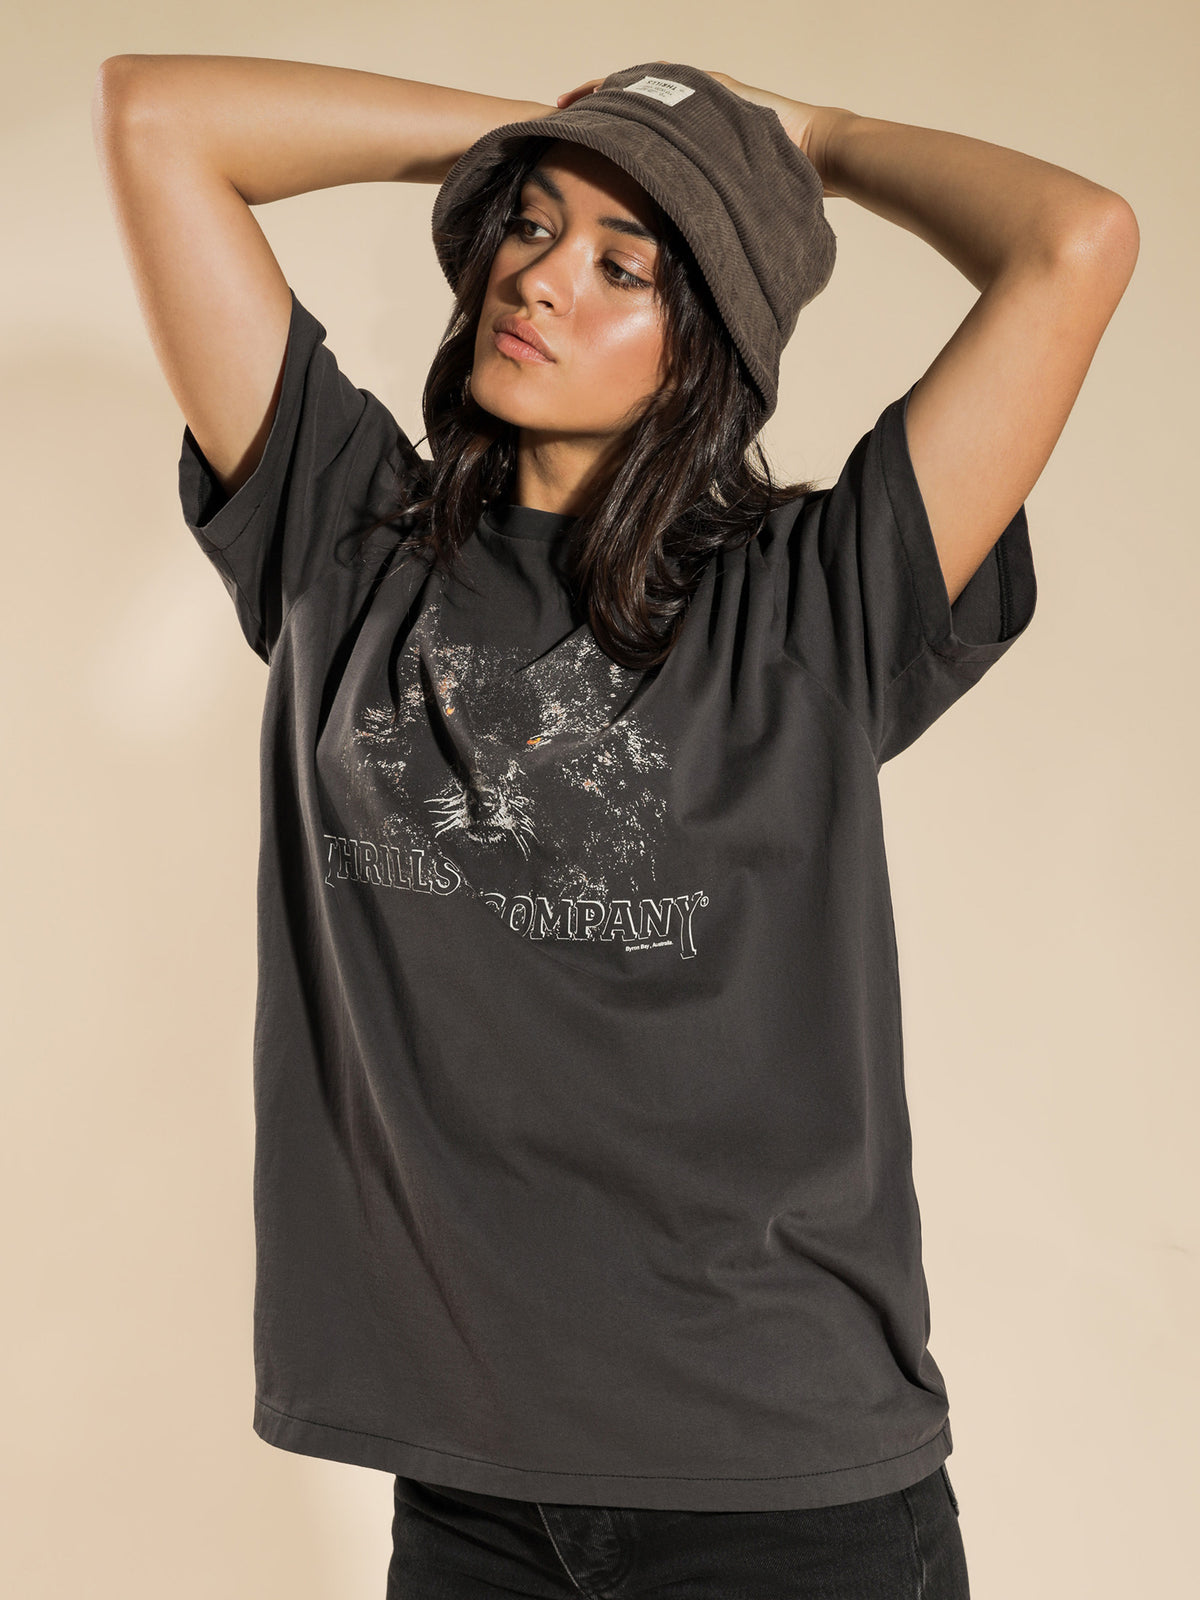 Shades Of Wolf T-Shirt in Vintage Black